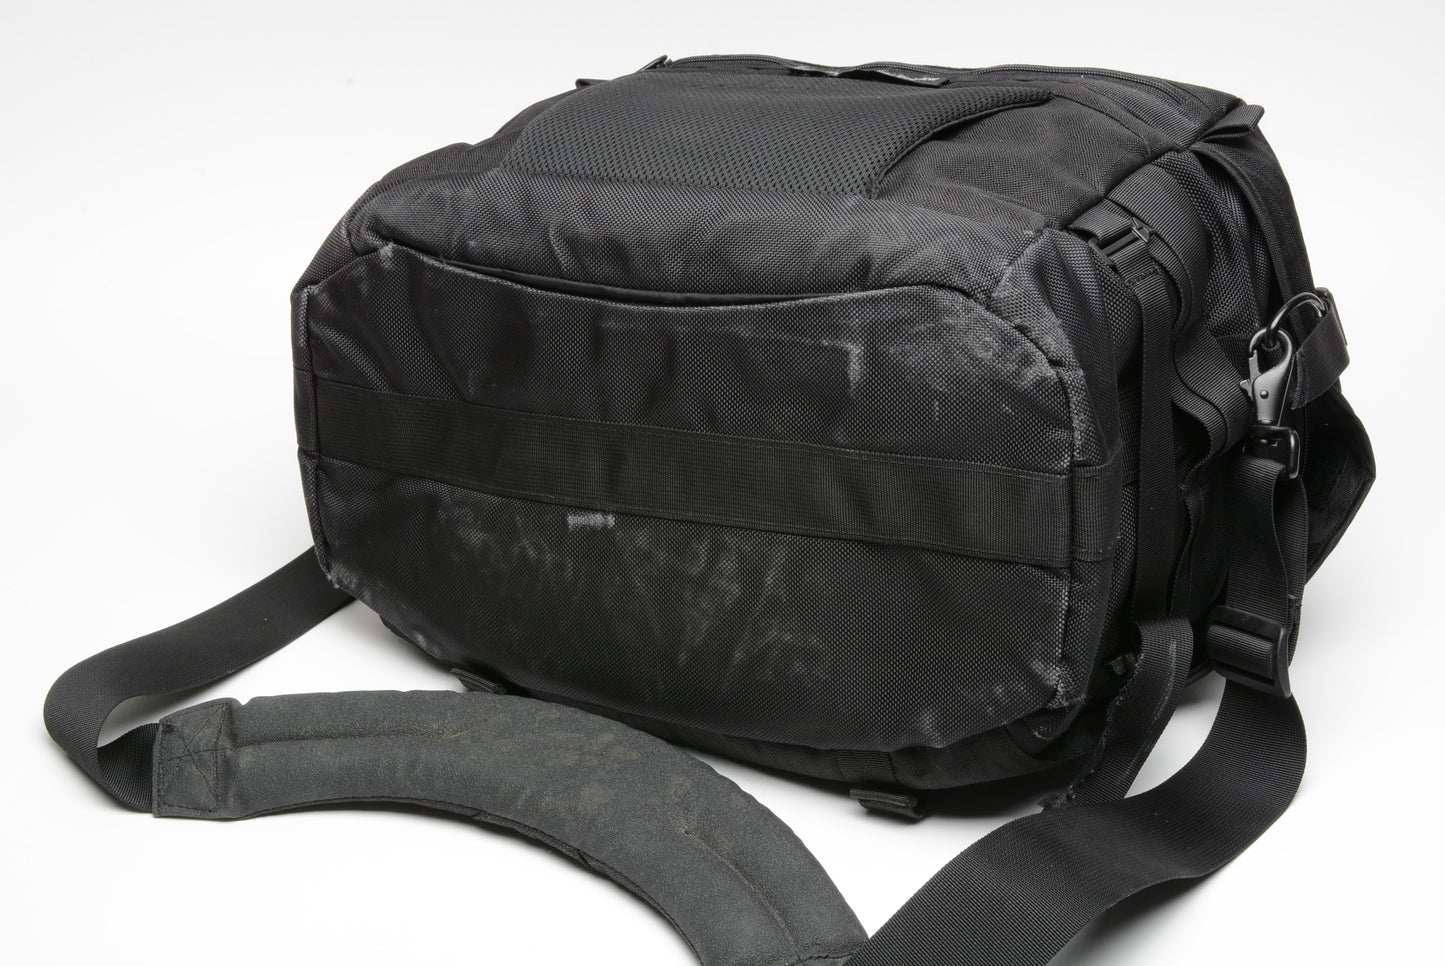 Lowepro Stealth Reporter 500AW photo shoulder bag, very clean, light use